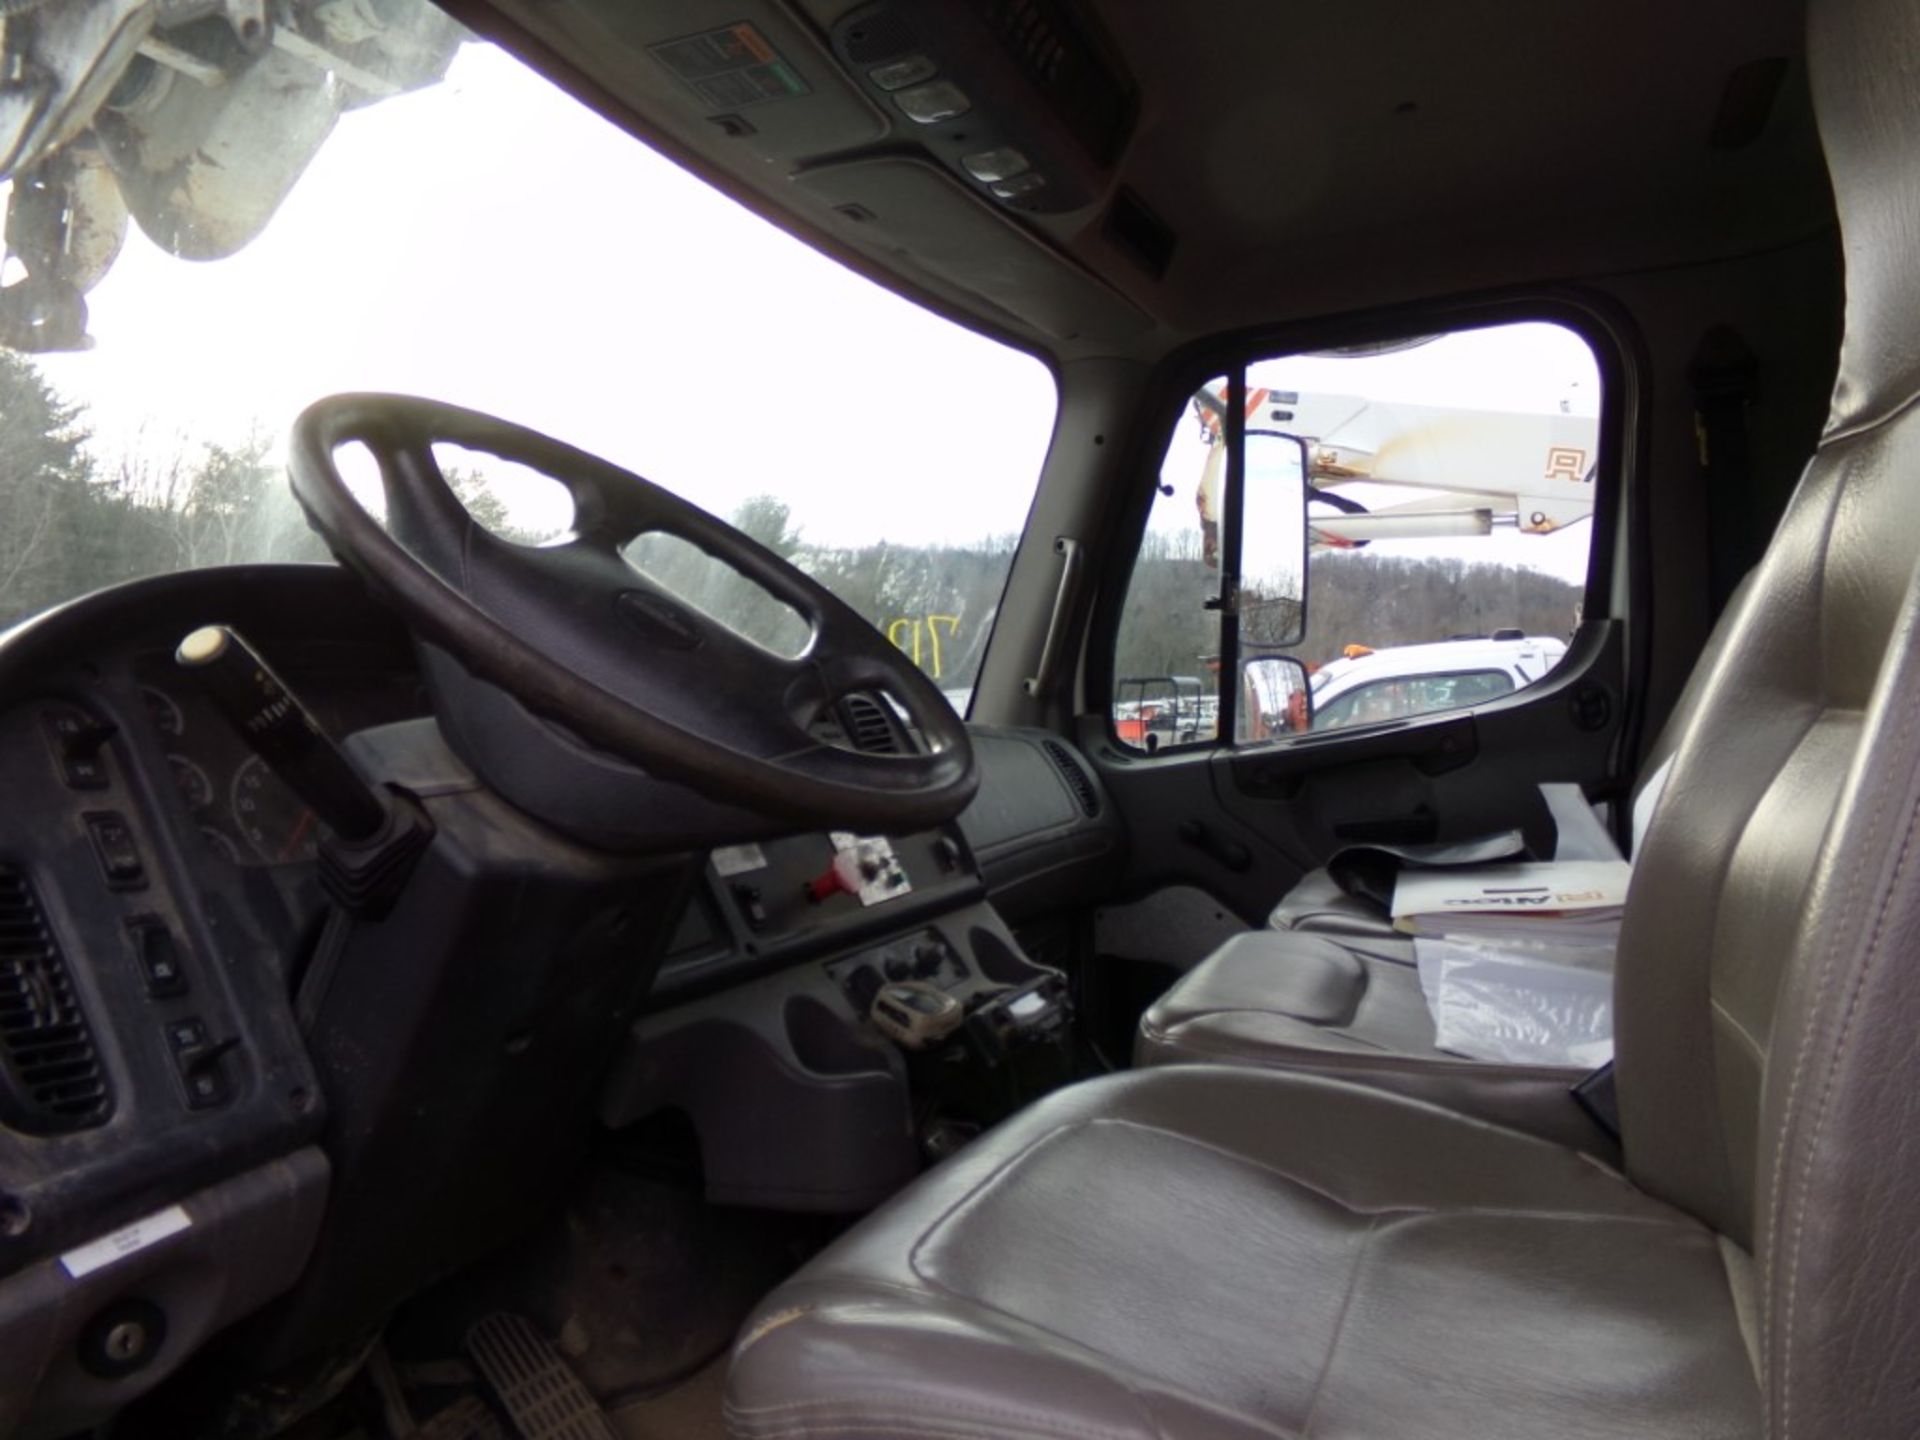 2008 Freightliner, 2 WD, Auger Truck, 60,036 Miles, Merc Benz Dsl. Auto Trans, 30,220 GVW, Side - Image 4 of 5